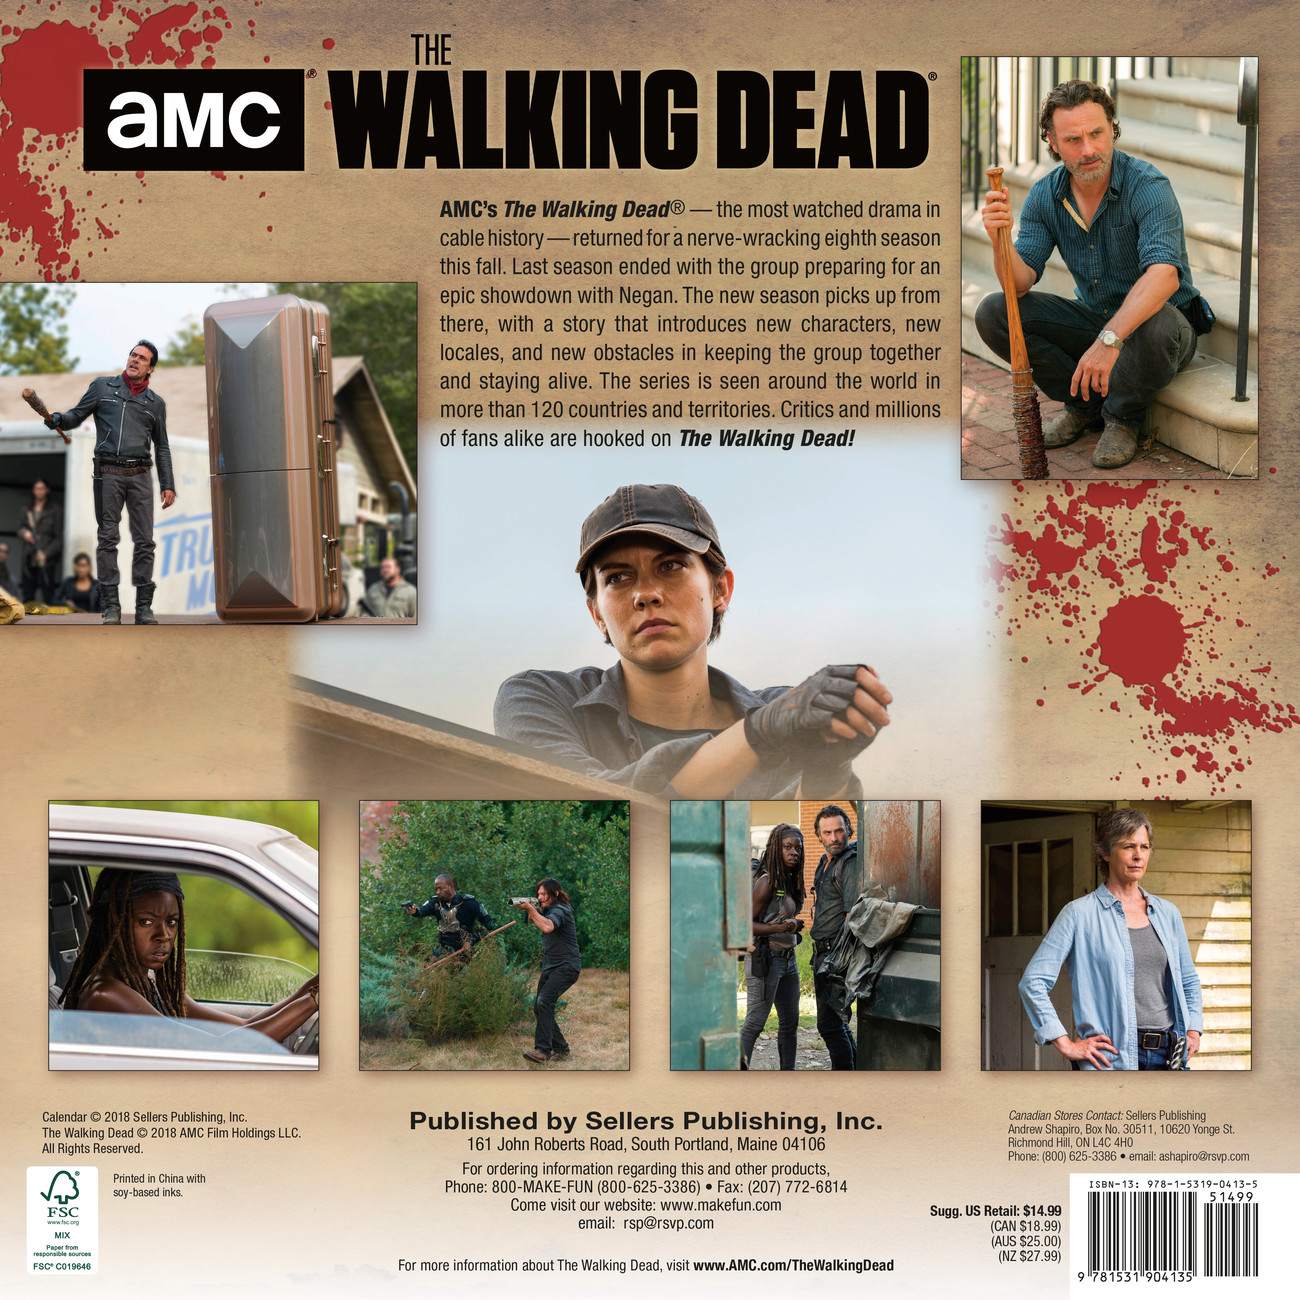 The Walking Dead - Wall Calendars 2024 | Buy at UKposters